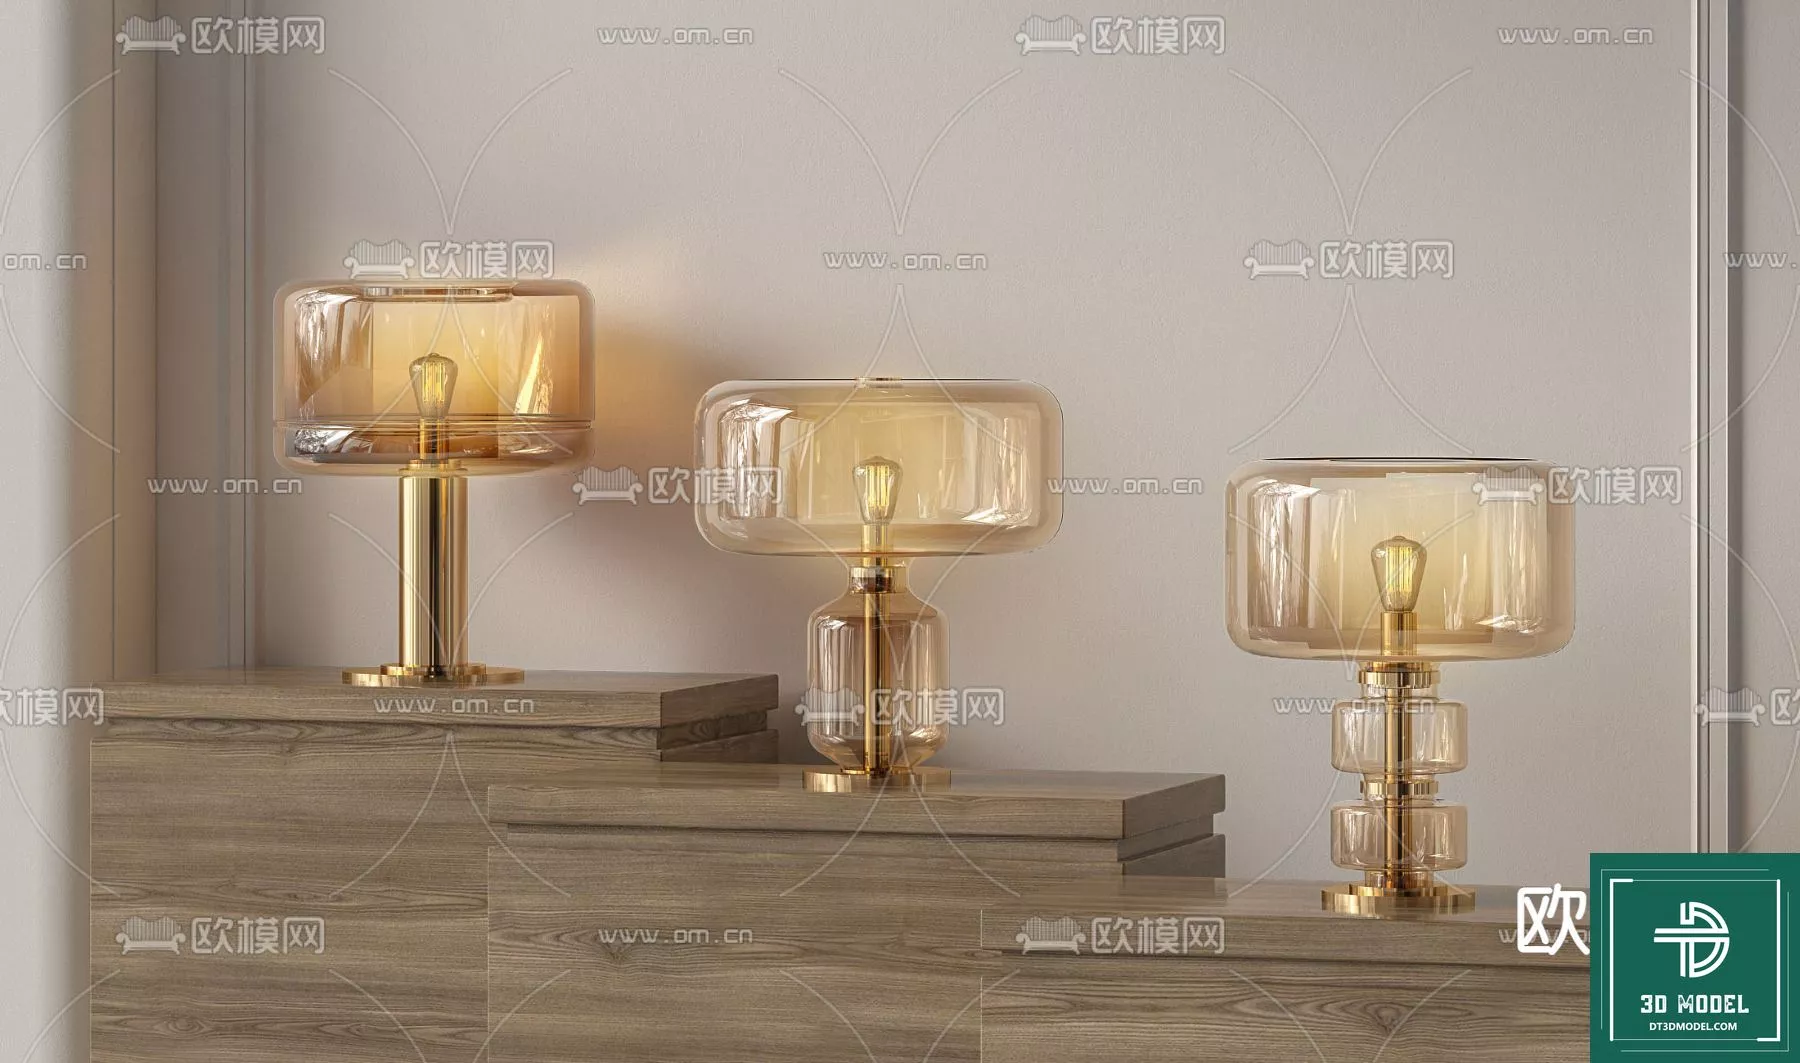 MODERN TABLE LAMP - SKETCHUP 3D MODEL - VRAY OR ENSCAPE - ID14572